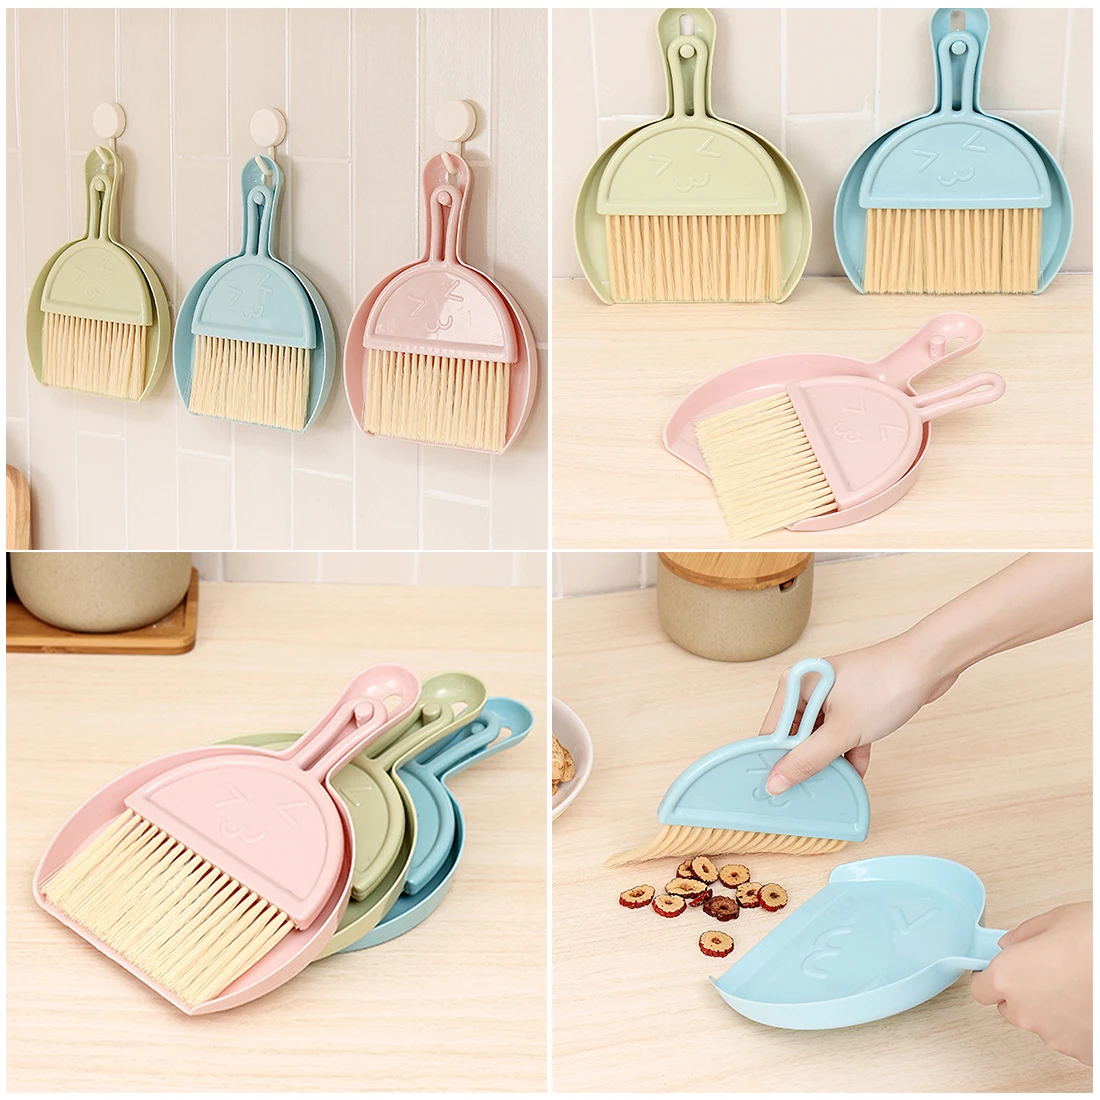 

Mini Cleaning Brush Small Broom Dustpans Set Desktop Sweeper Garbage Cleaning Shovel Table Household Cleaning Tools Practical